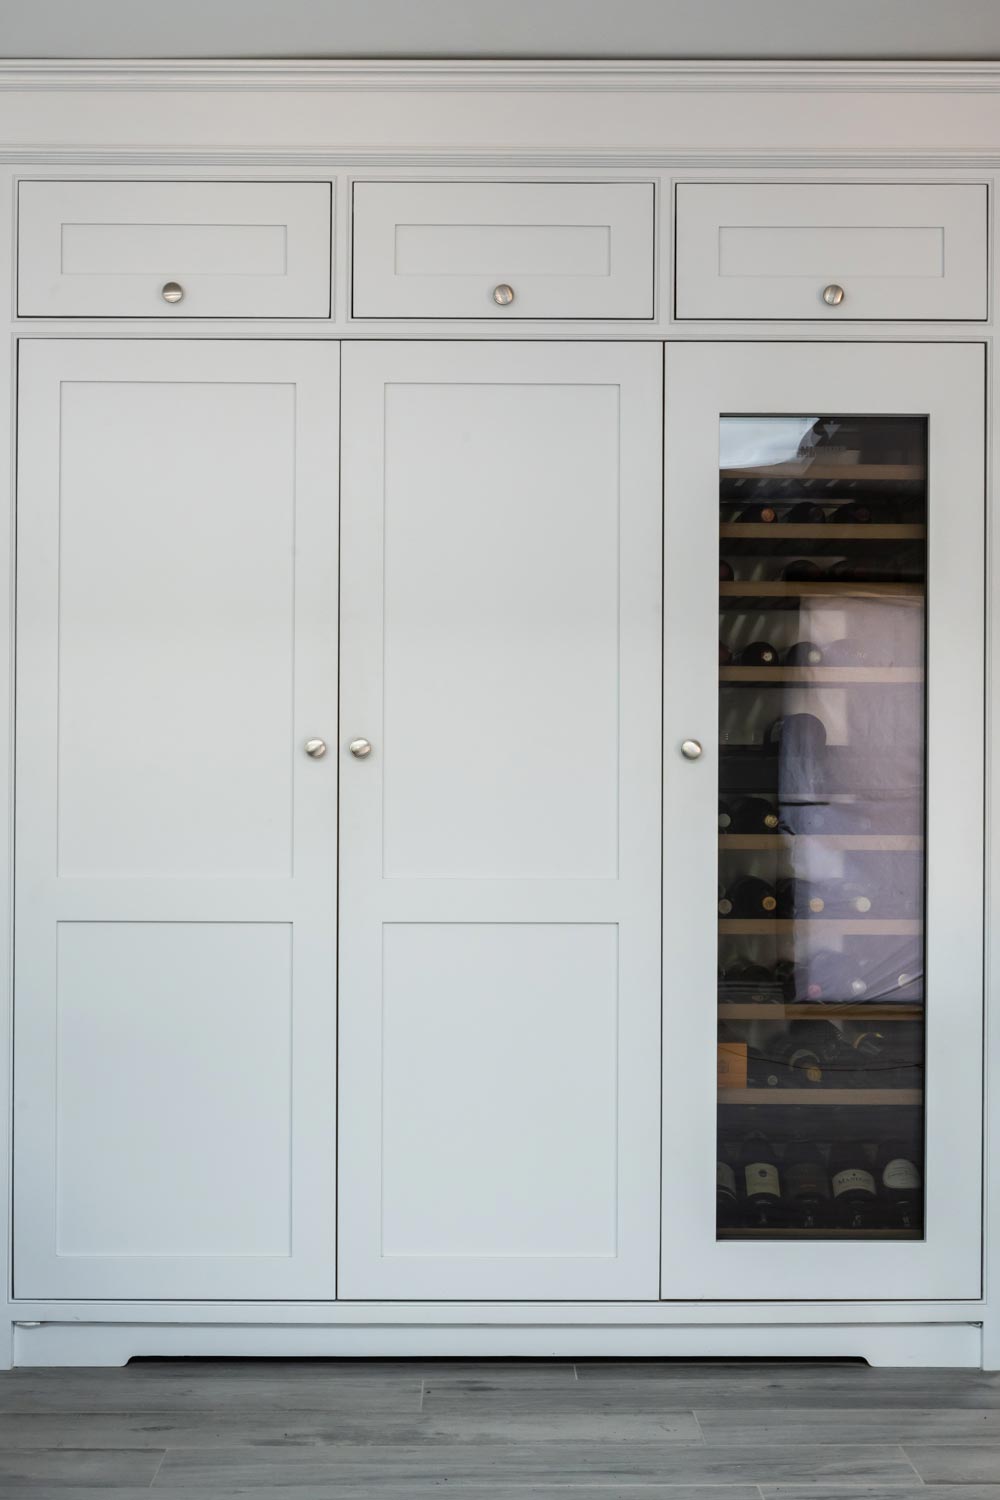 The Foxhills Kitchen by Shere Kitchens - beautiful kitchens handmade in Shere Guildford Surrey